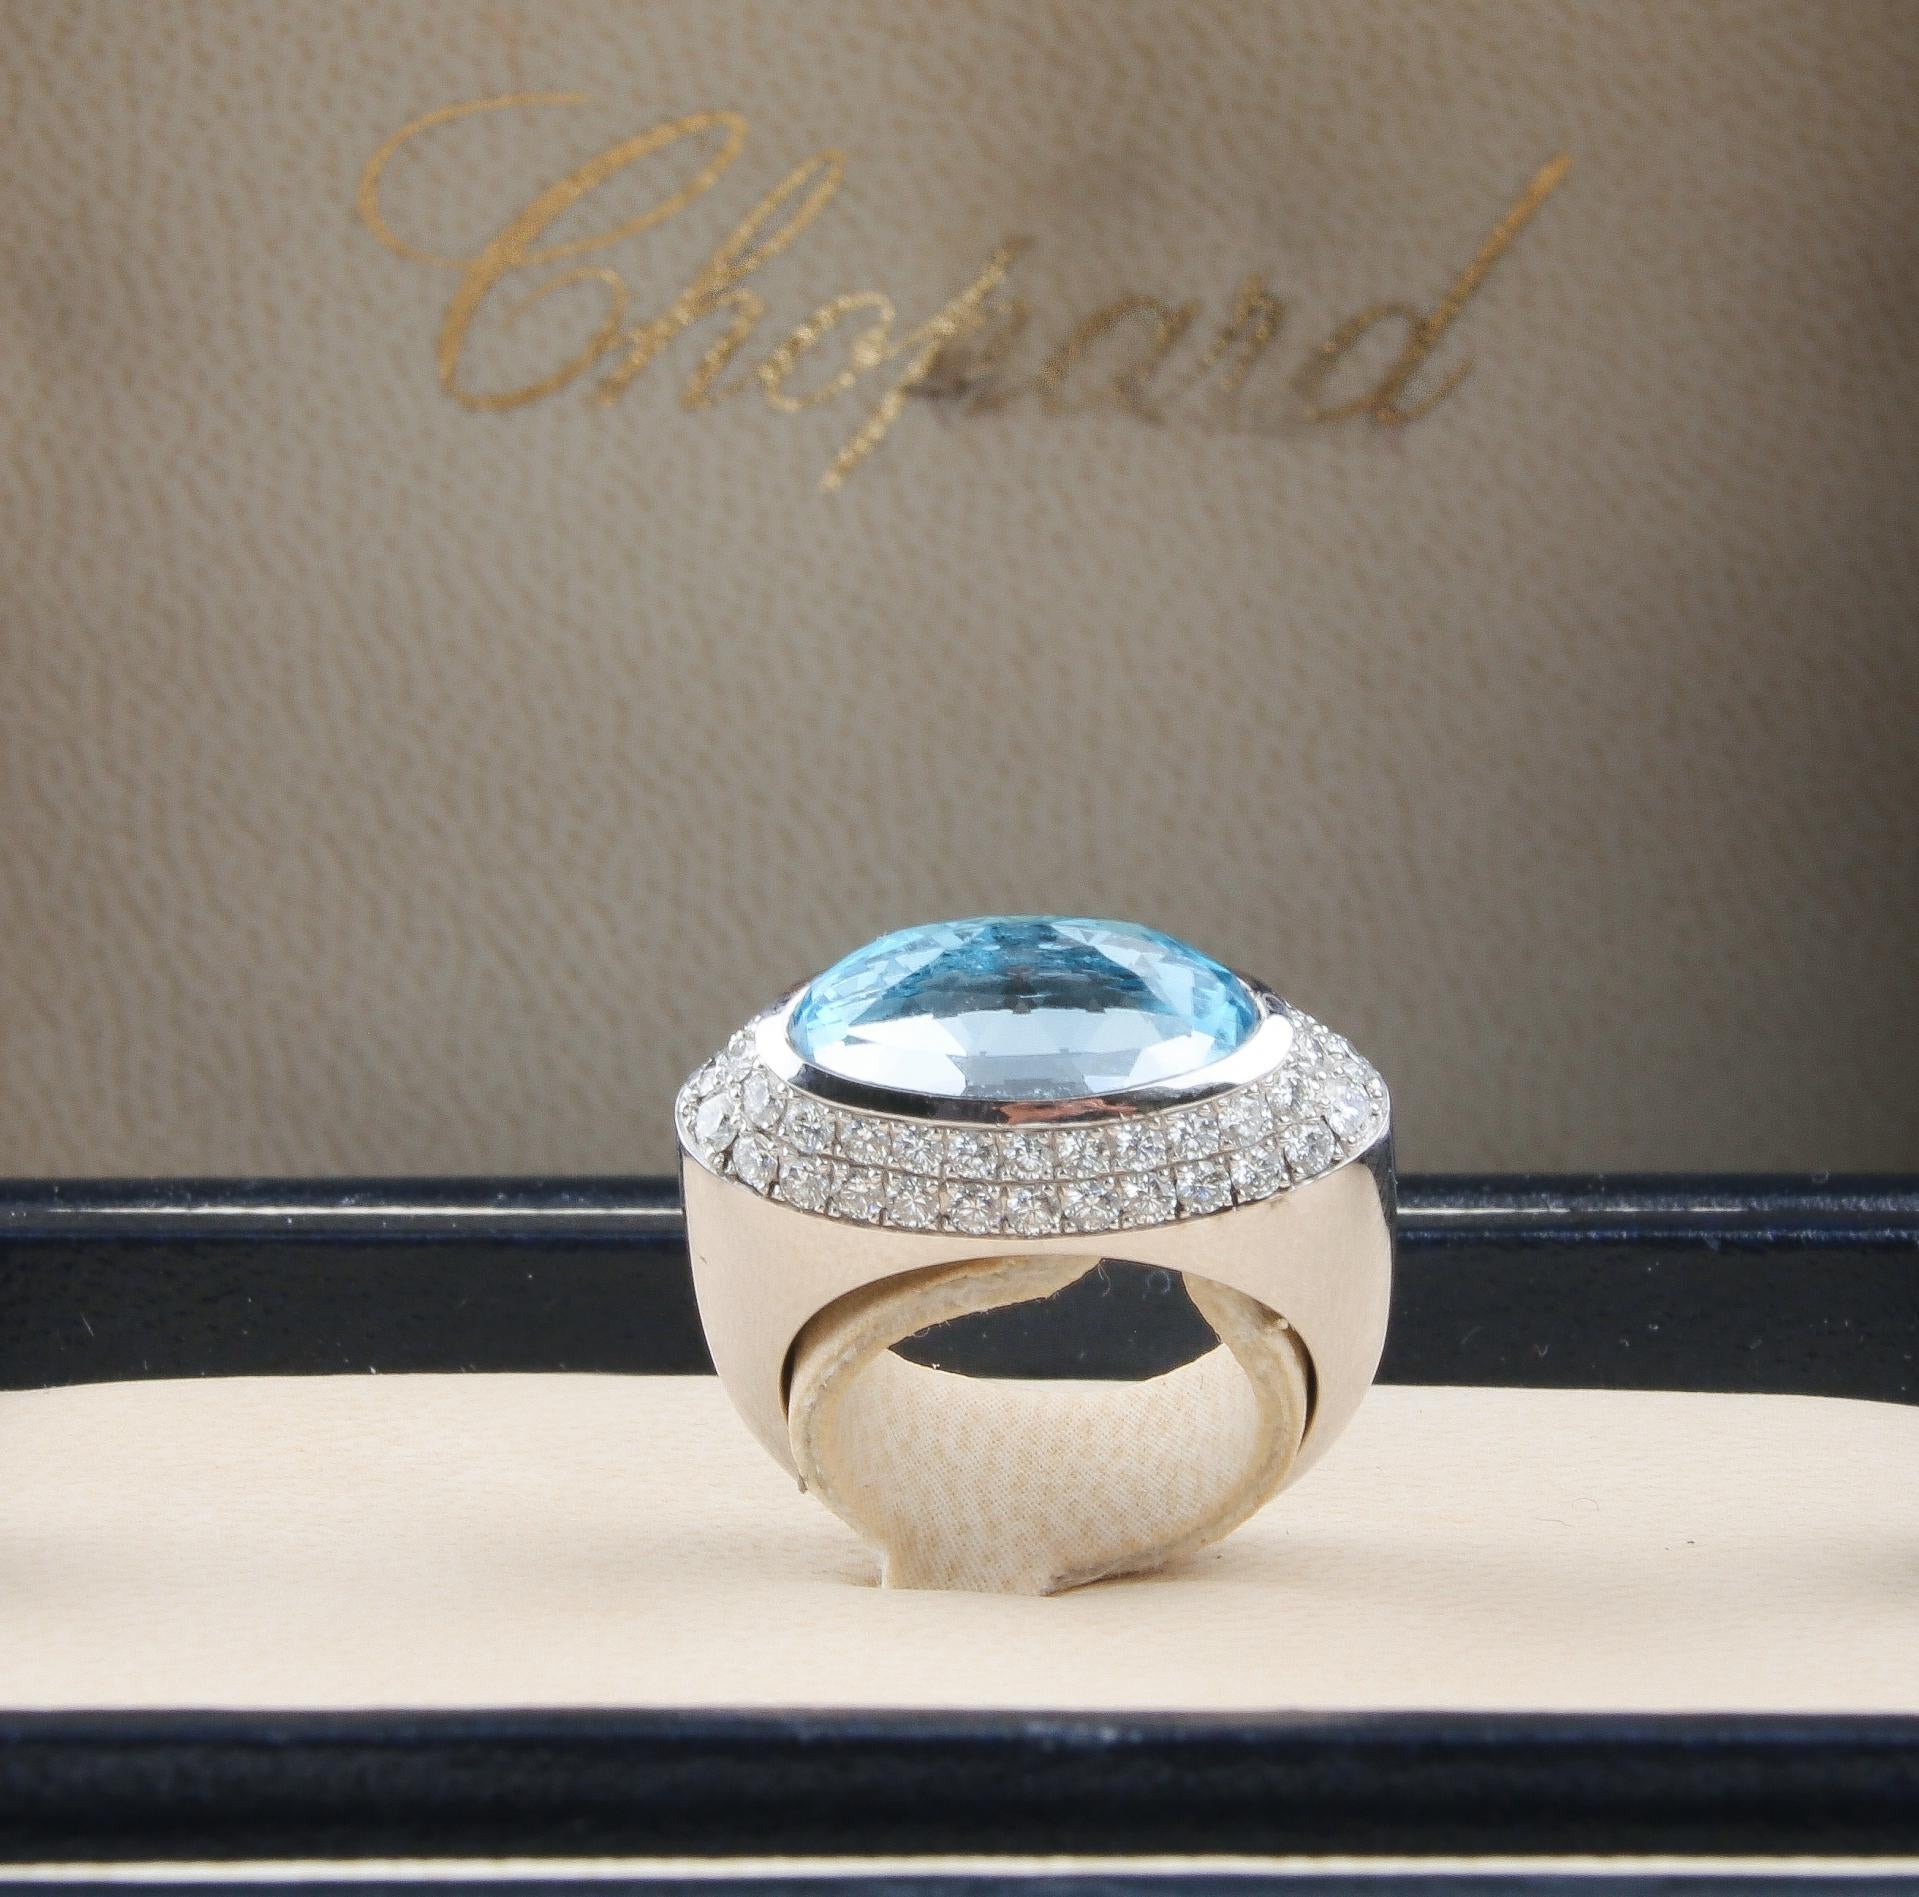 A truly magnificent white gold Chopard topaz and diamond ring. This stunning ring features a huge oval-shaped multi-faceted blue topaz, with brilliant-cut diamond surrounds. Signed and numbered Chopard 82/3839/7. Serial number 3084388. Topaz weight